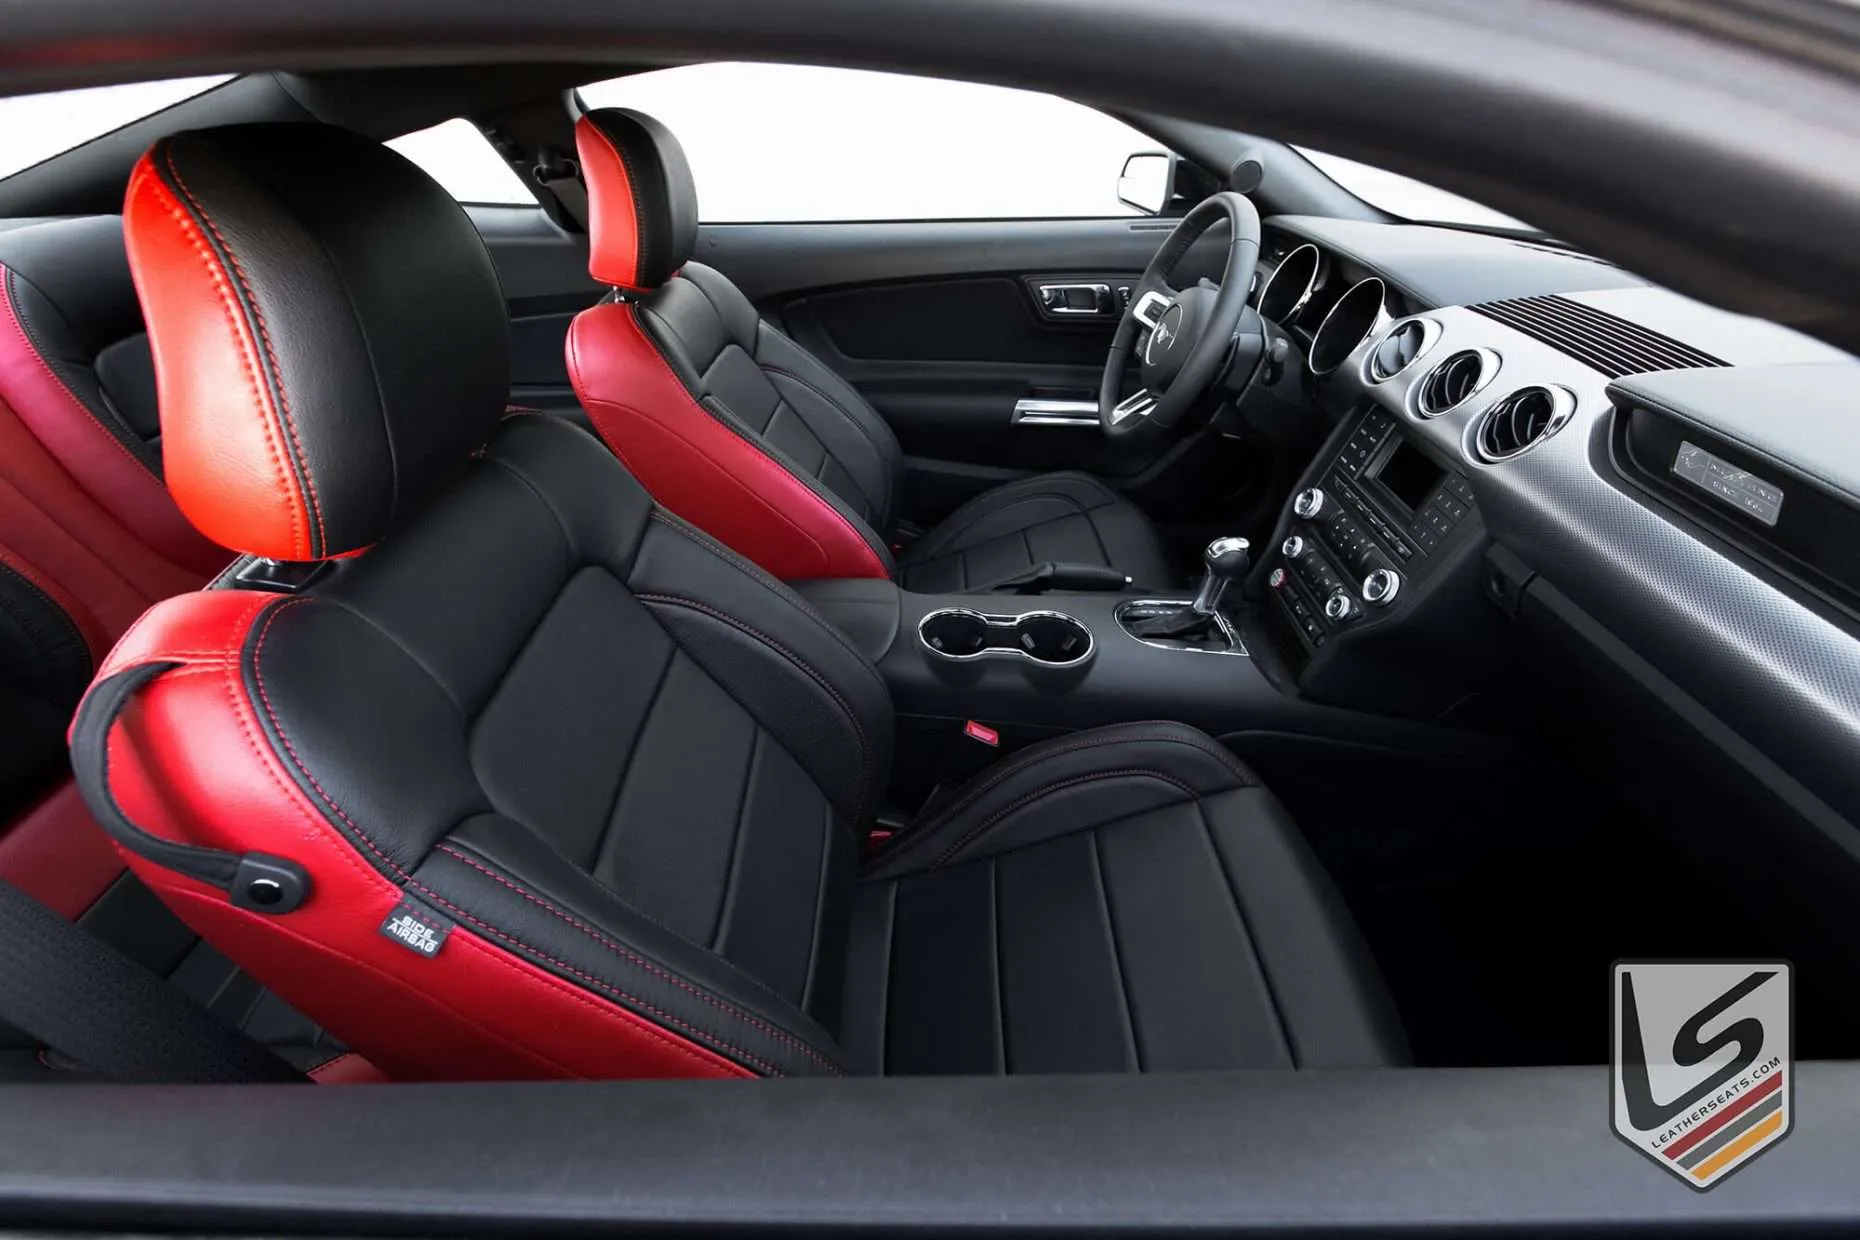 Alternative view of front passenger seat - Bright Red, Black and Piazza Red